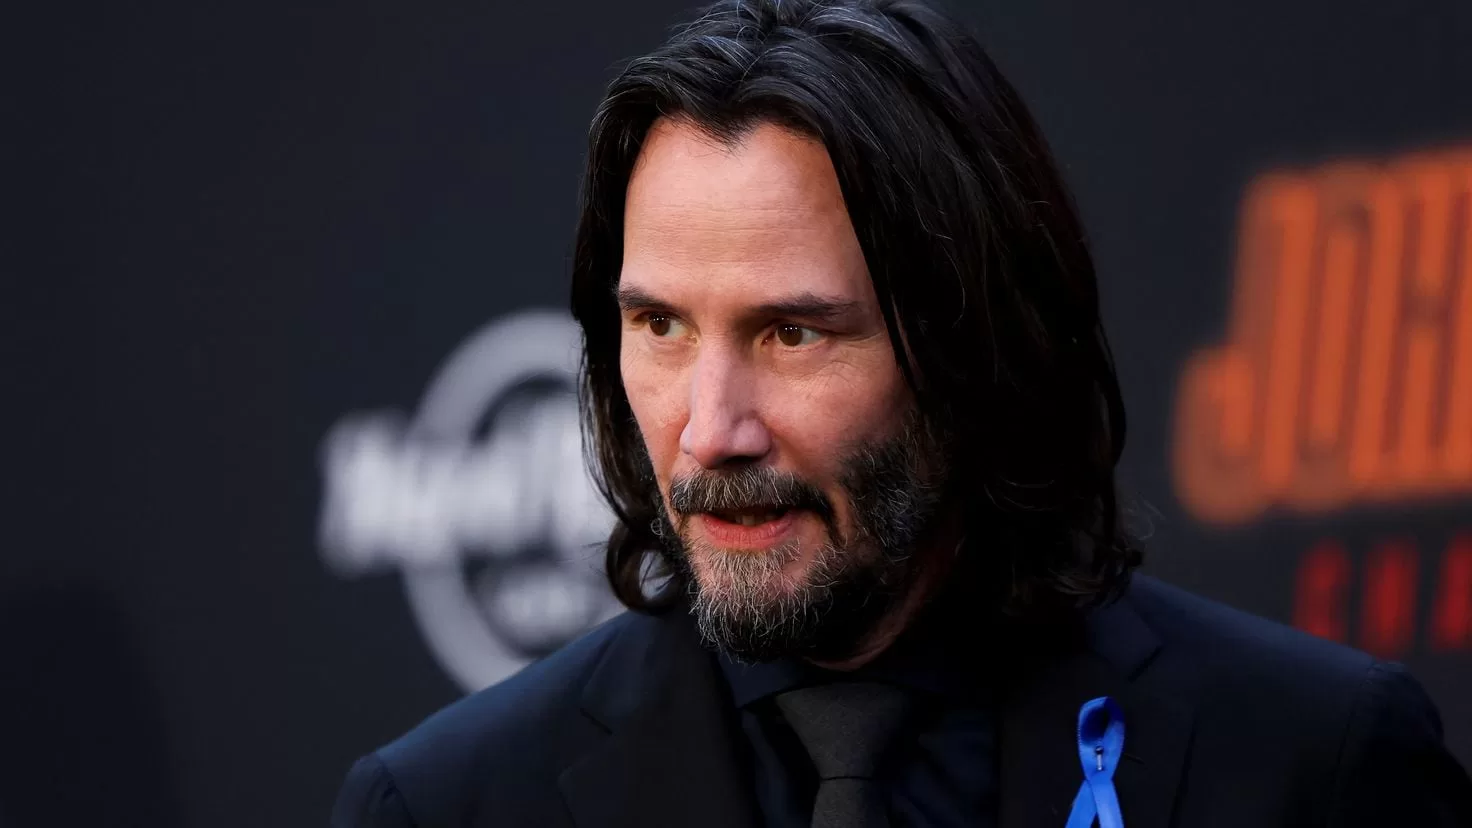 Keanu Reeves' house attacked with firearms
